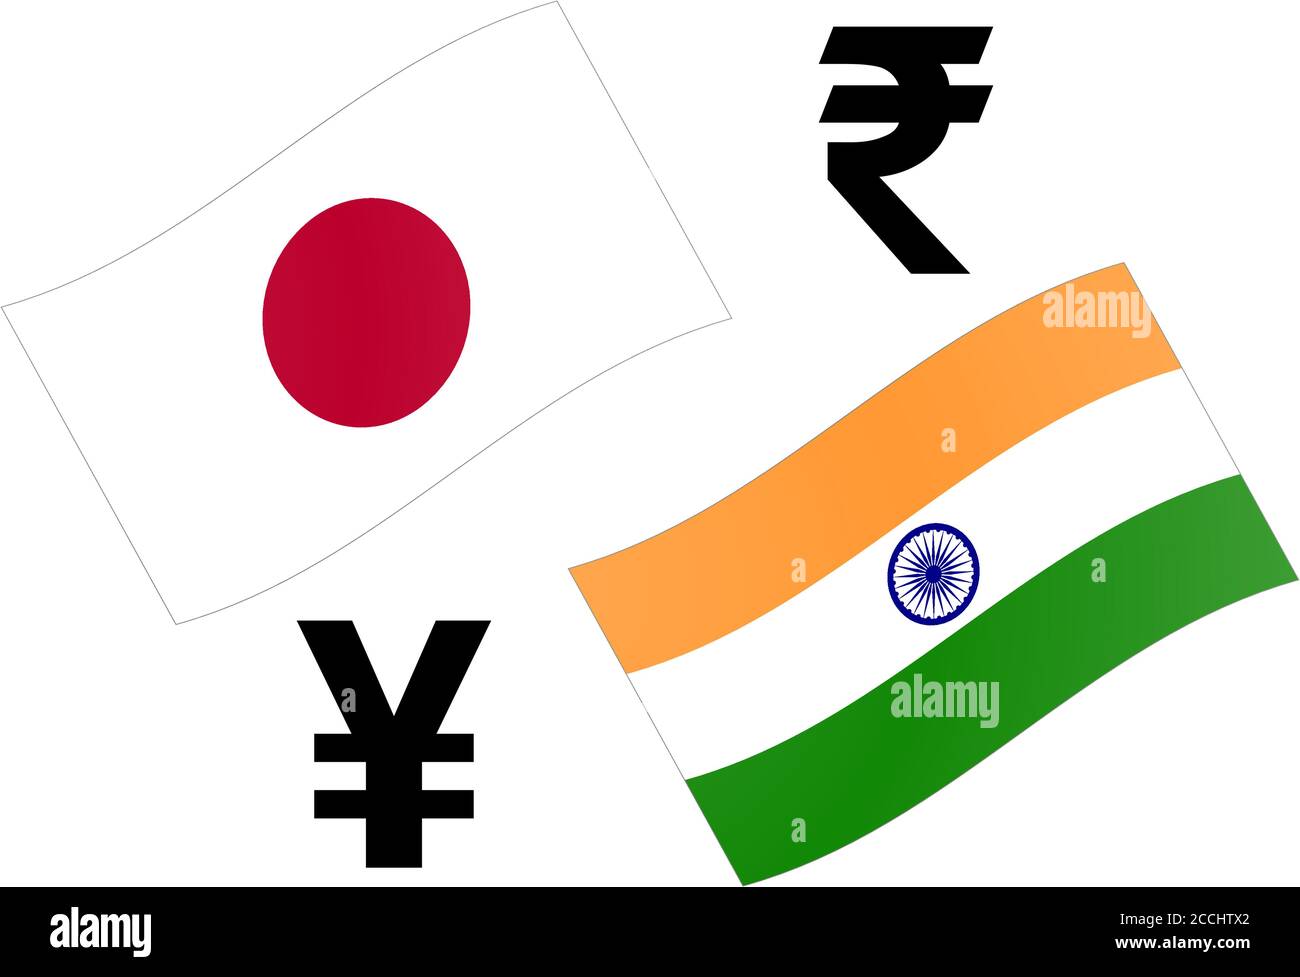 JPYINR forex currency pair vector illustration. Japanese and Indian flag, with Yen and Rupee symbol. Stock Vector